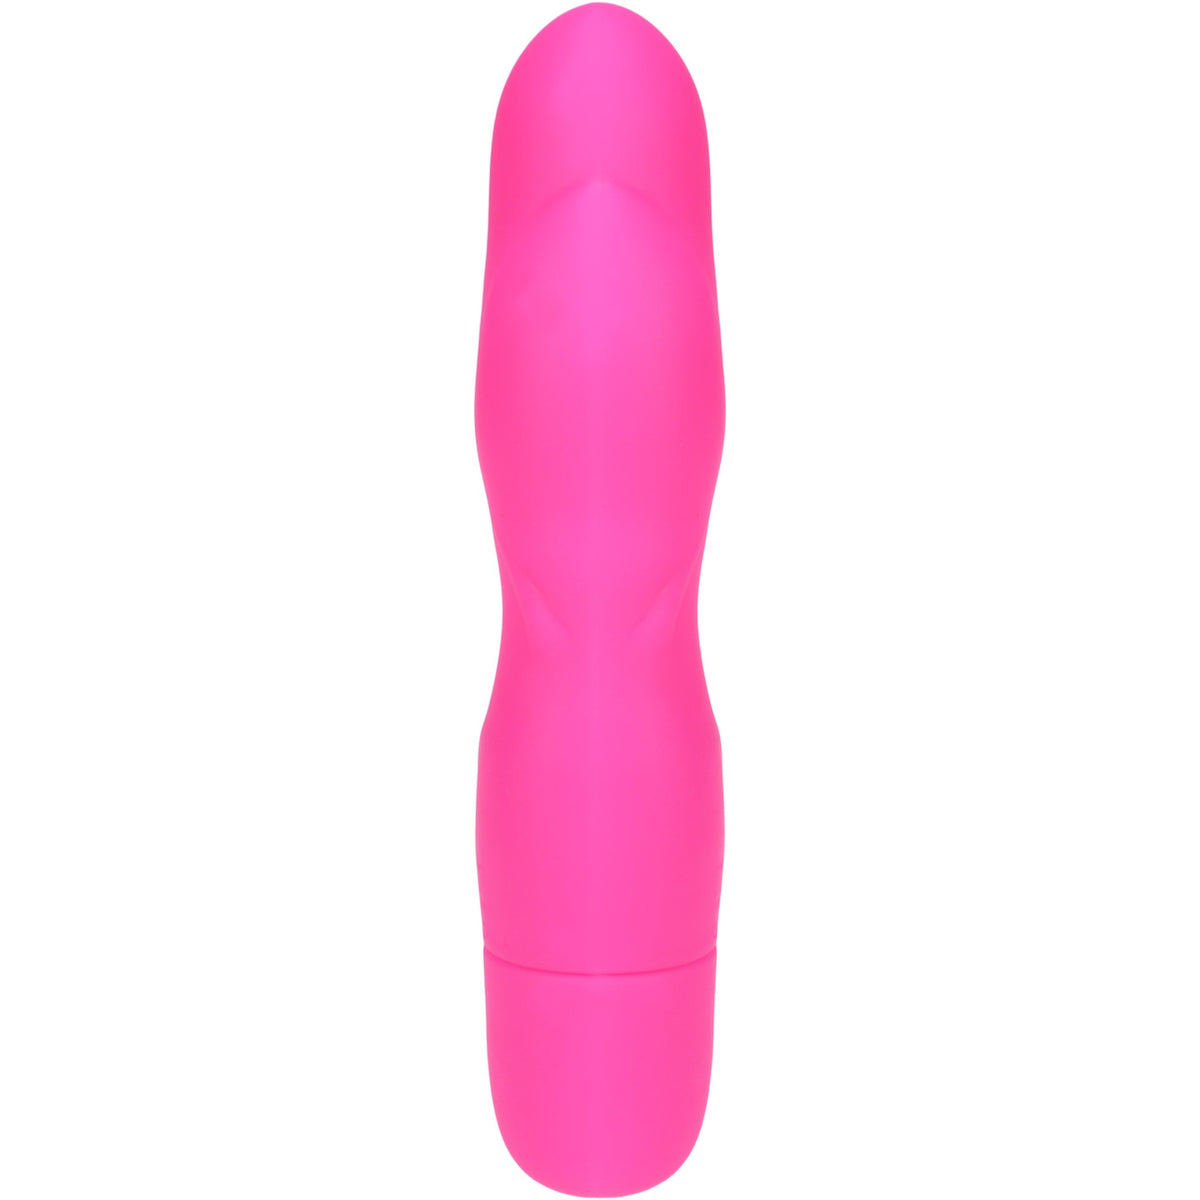 NMC First Night 5 inch Silicone 10 Function G-Spot Vibe with Ripples - Pink